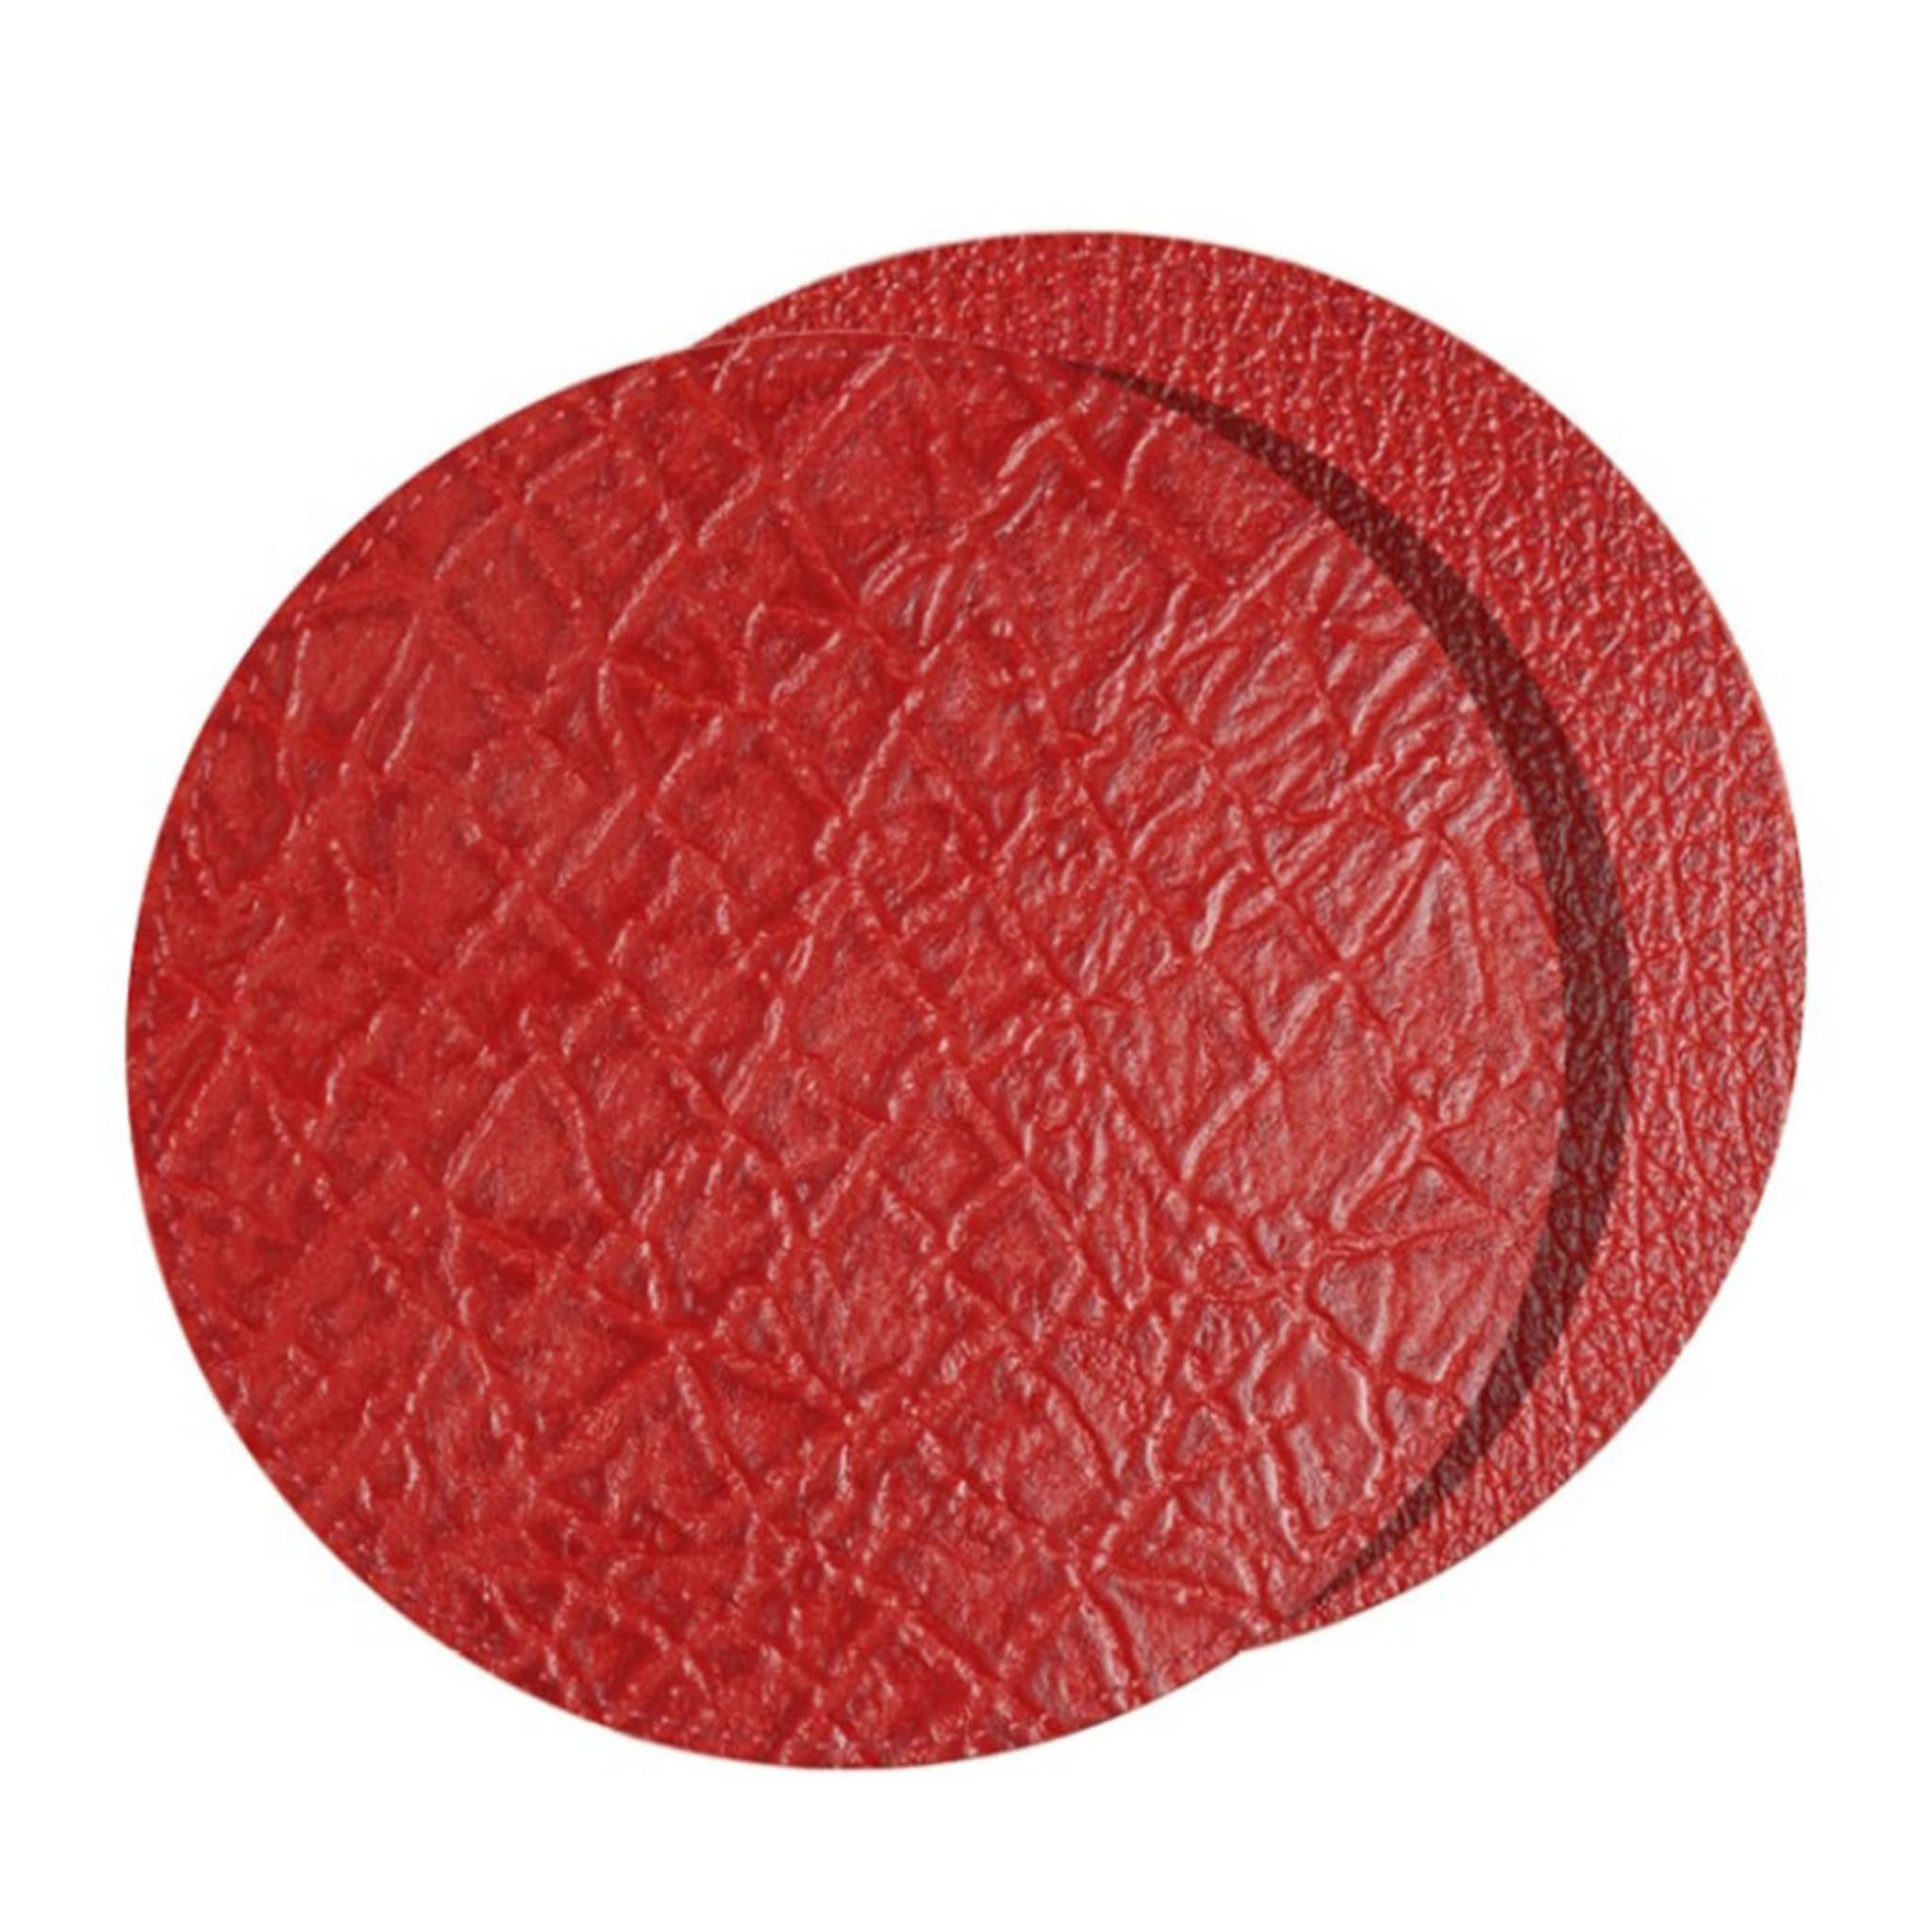 Tanzania Medium Set of 2 Round Red Leather Placemats - Main view